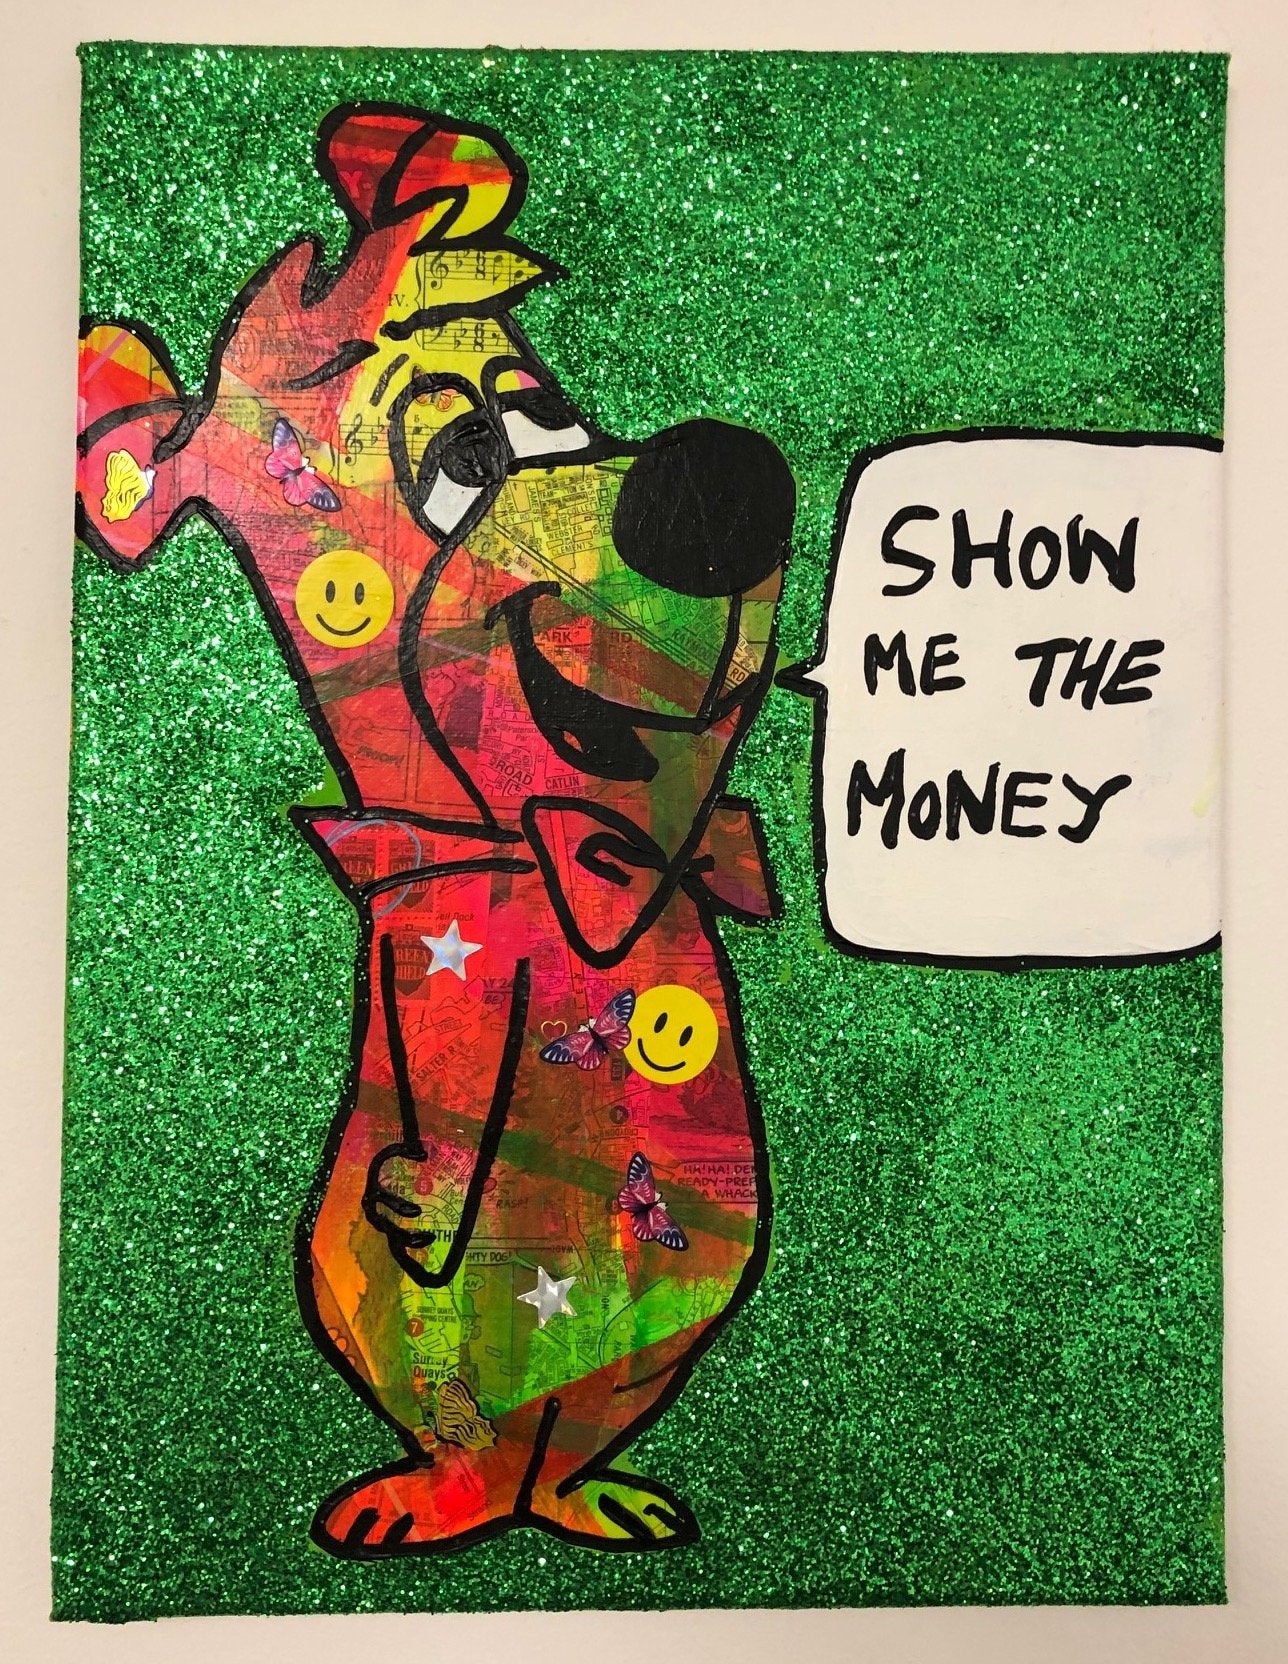 Show me the money by Barrie J Davies 2019, mixed media on canvas, unframed, 30cm x 40cm. Barrie J Davies is an Artist - Pop Art and Street art inspired Artist based in Brighton England UK - Pop Art Paintings, Street Art Prints & Editions available. 